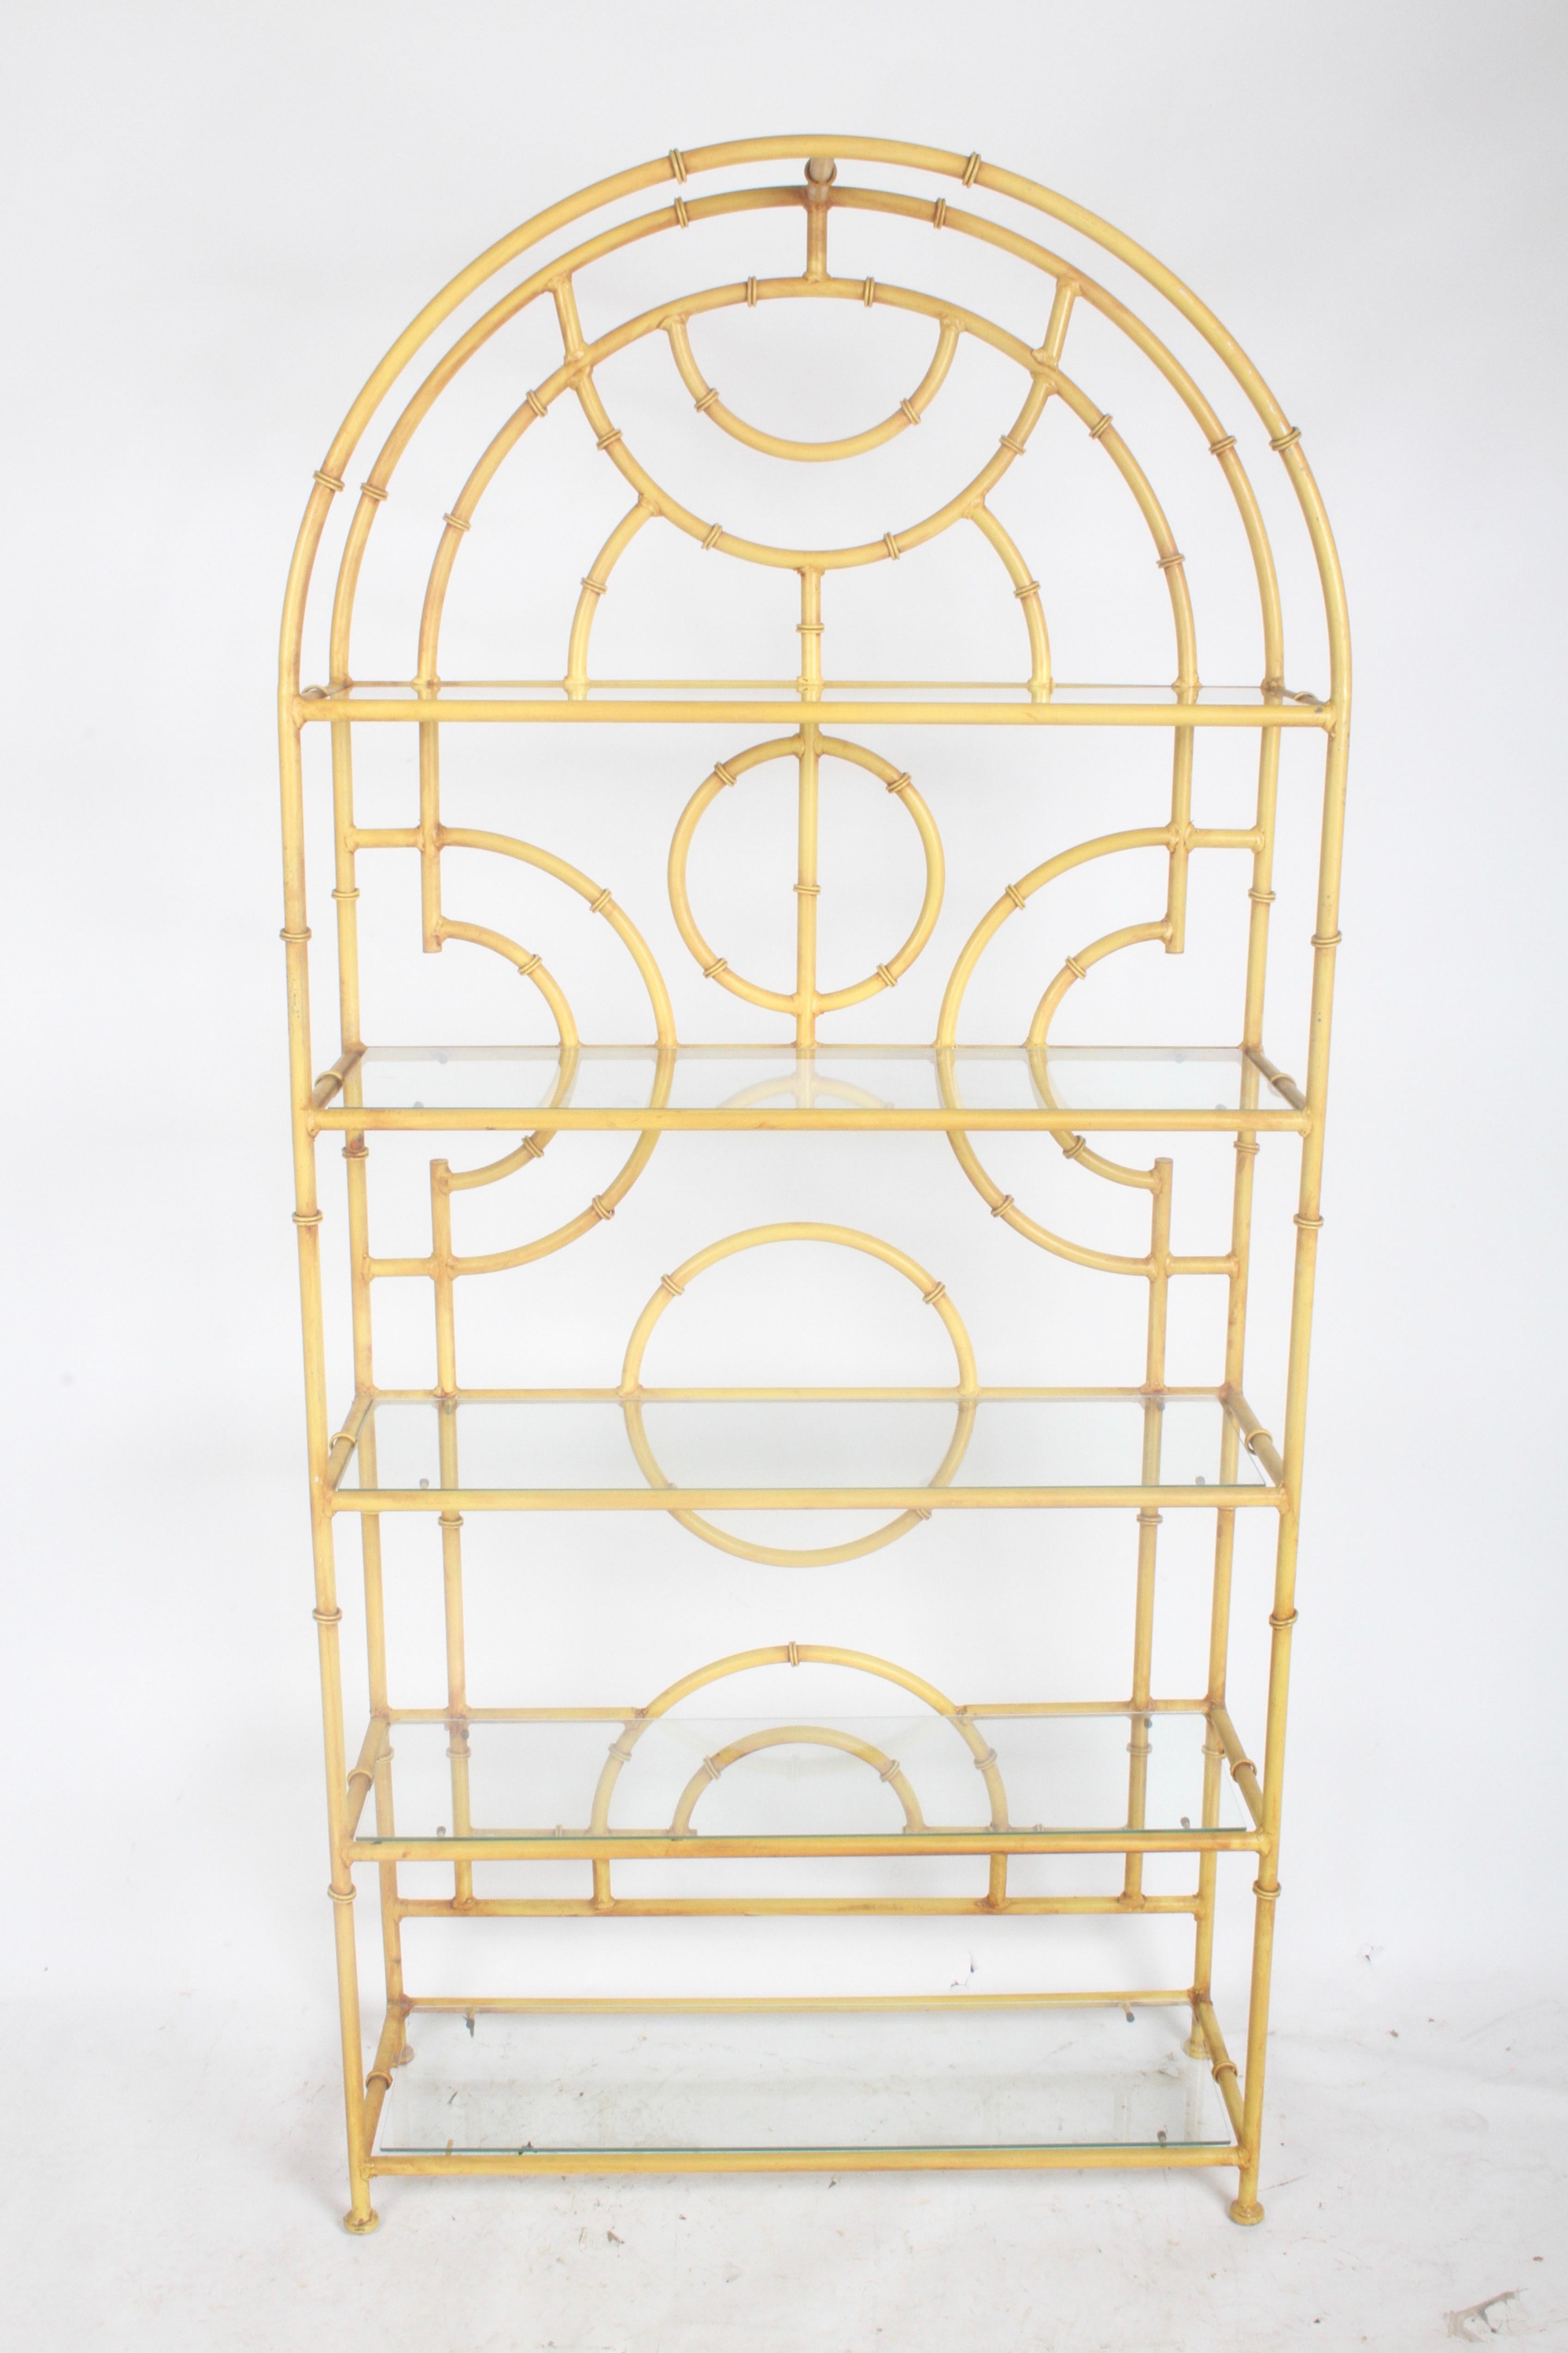 HOLLYWOOD REGENCY CHINESE CHIPPENDALE GOLD IRON GLASS WALL SHELF CURIO DISPLAY 